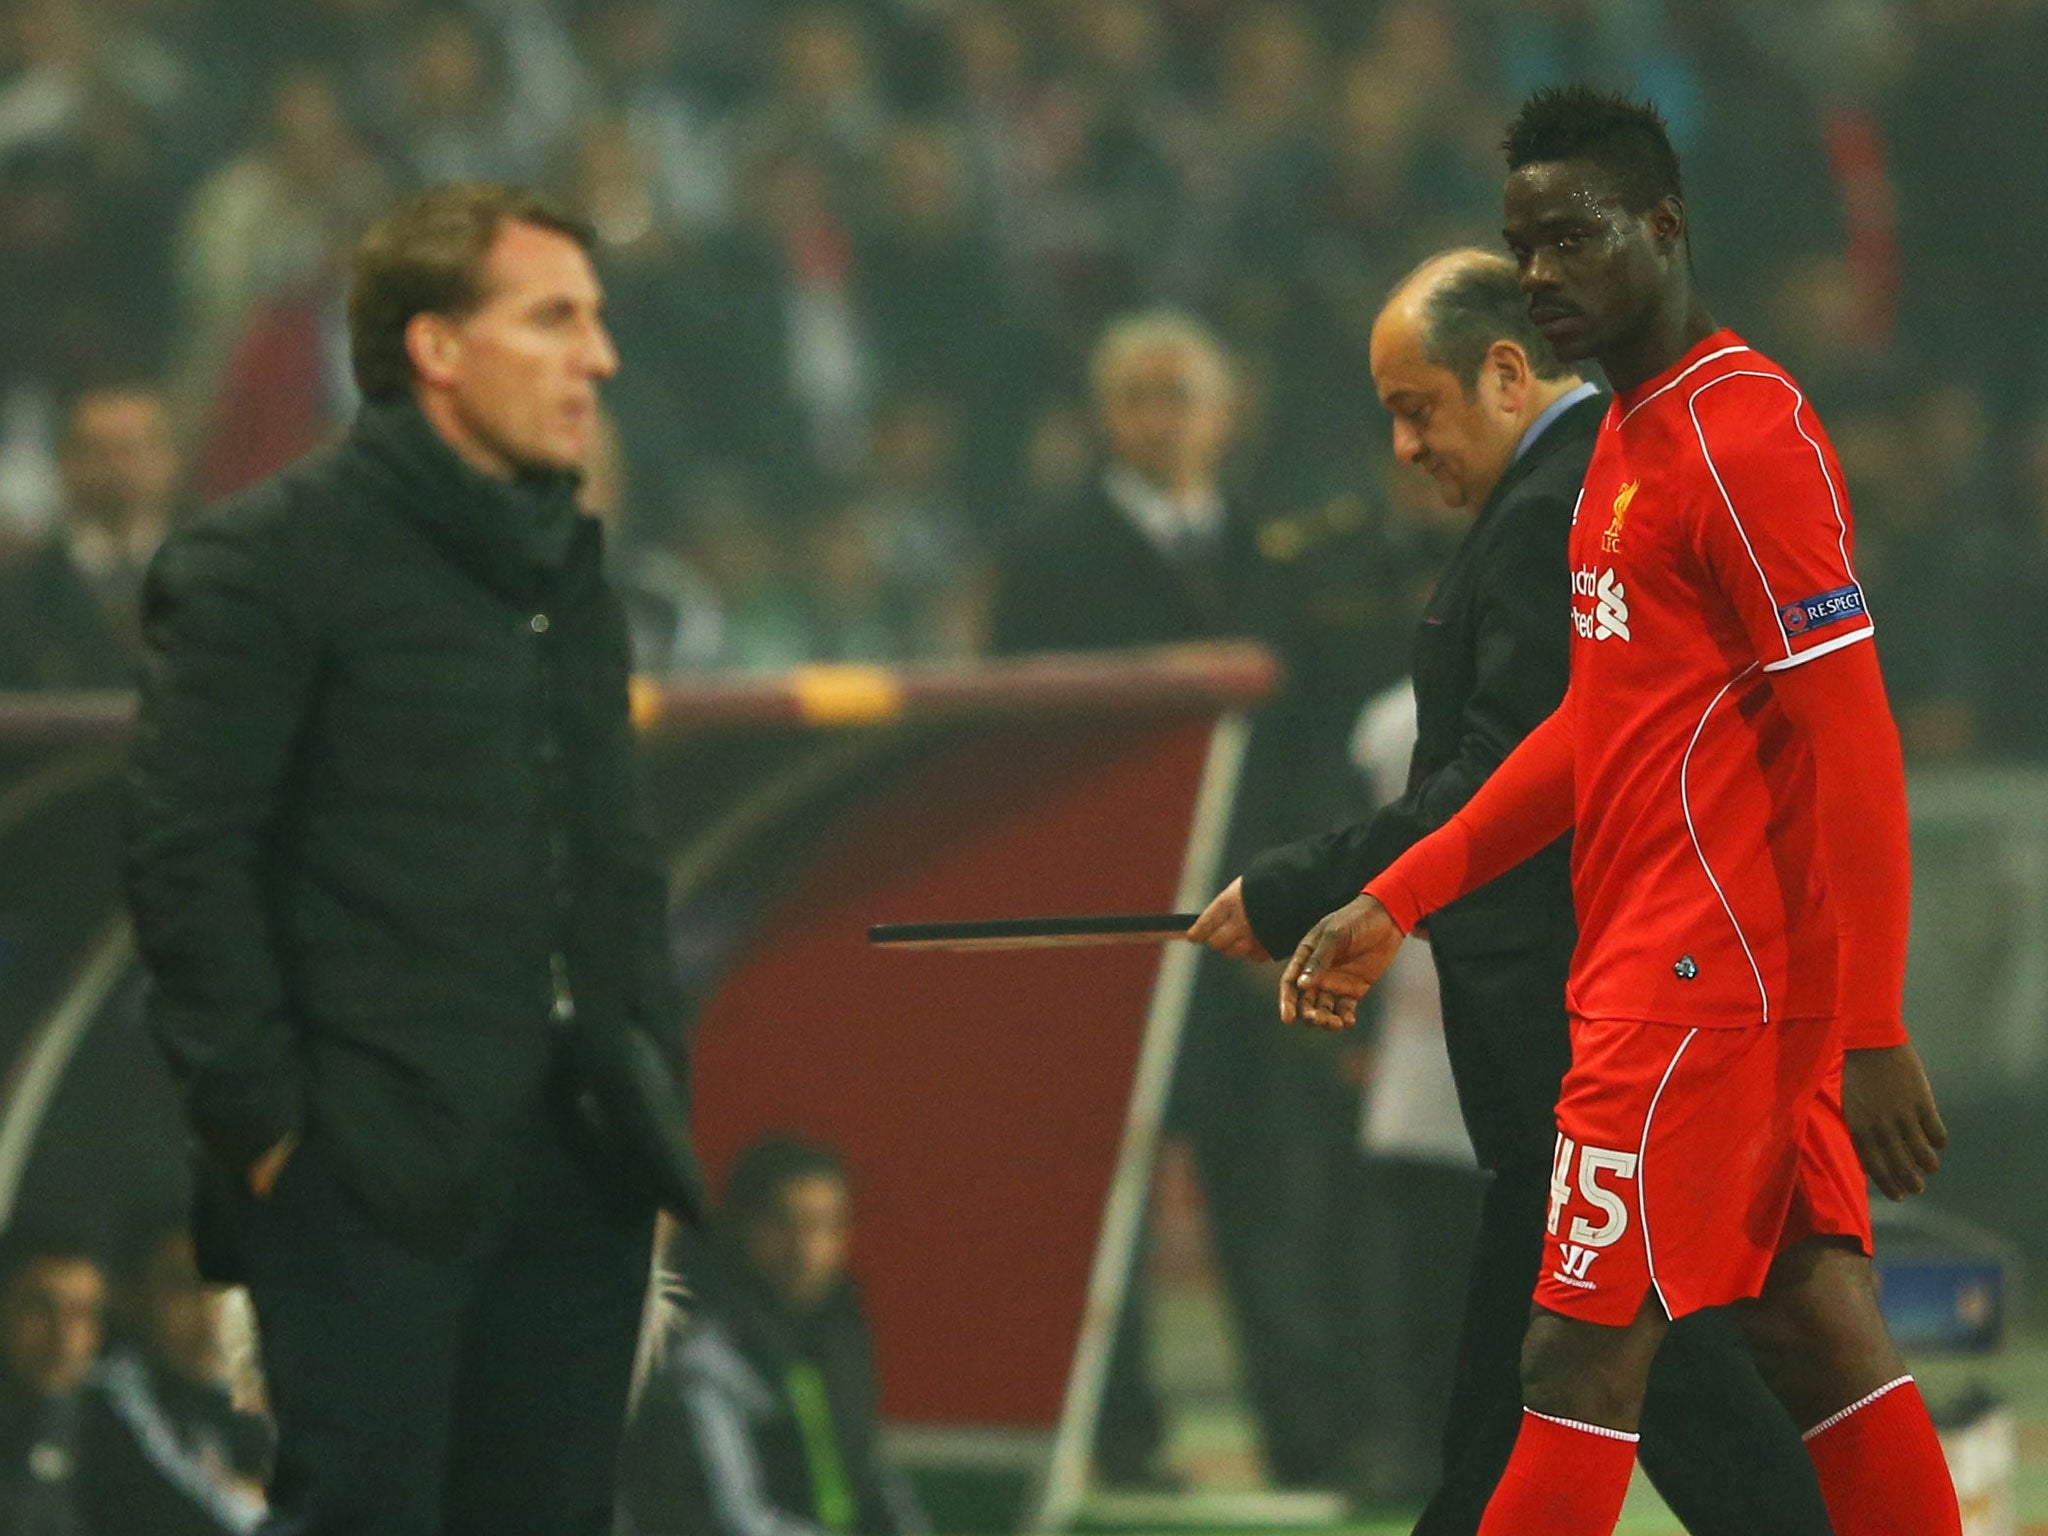 Balotelli glances across to manager Brendan Rodgers as he is substituted in the 82nd minute